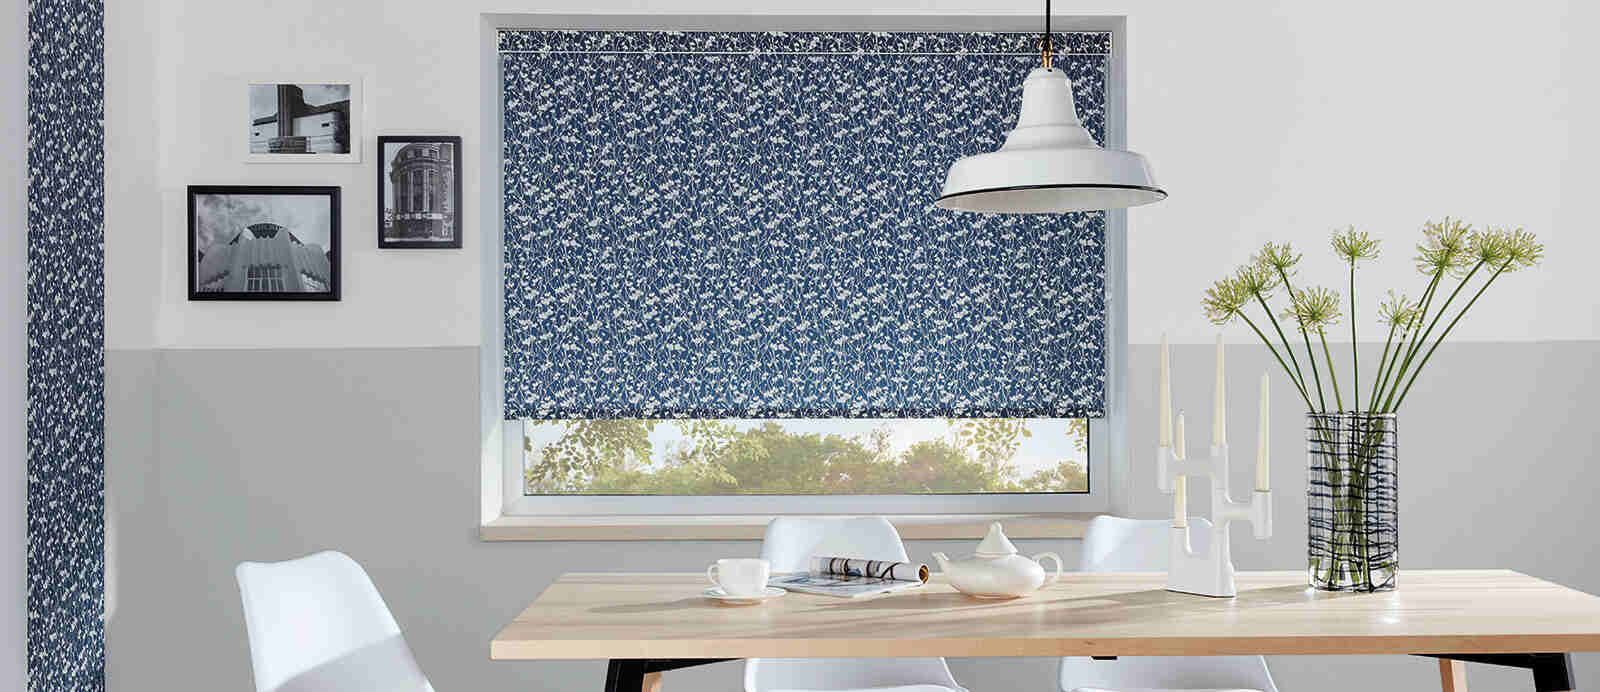 what types of roller blinds are best